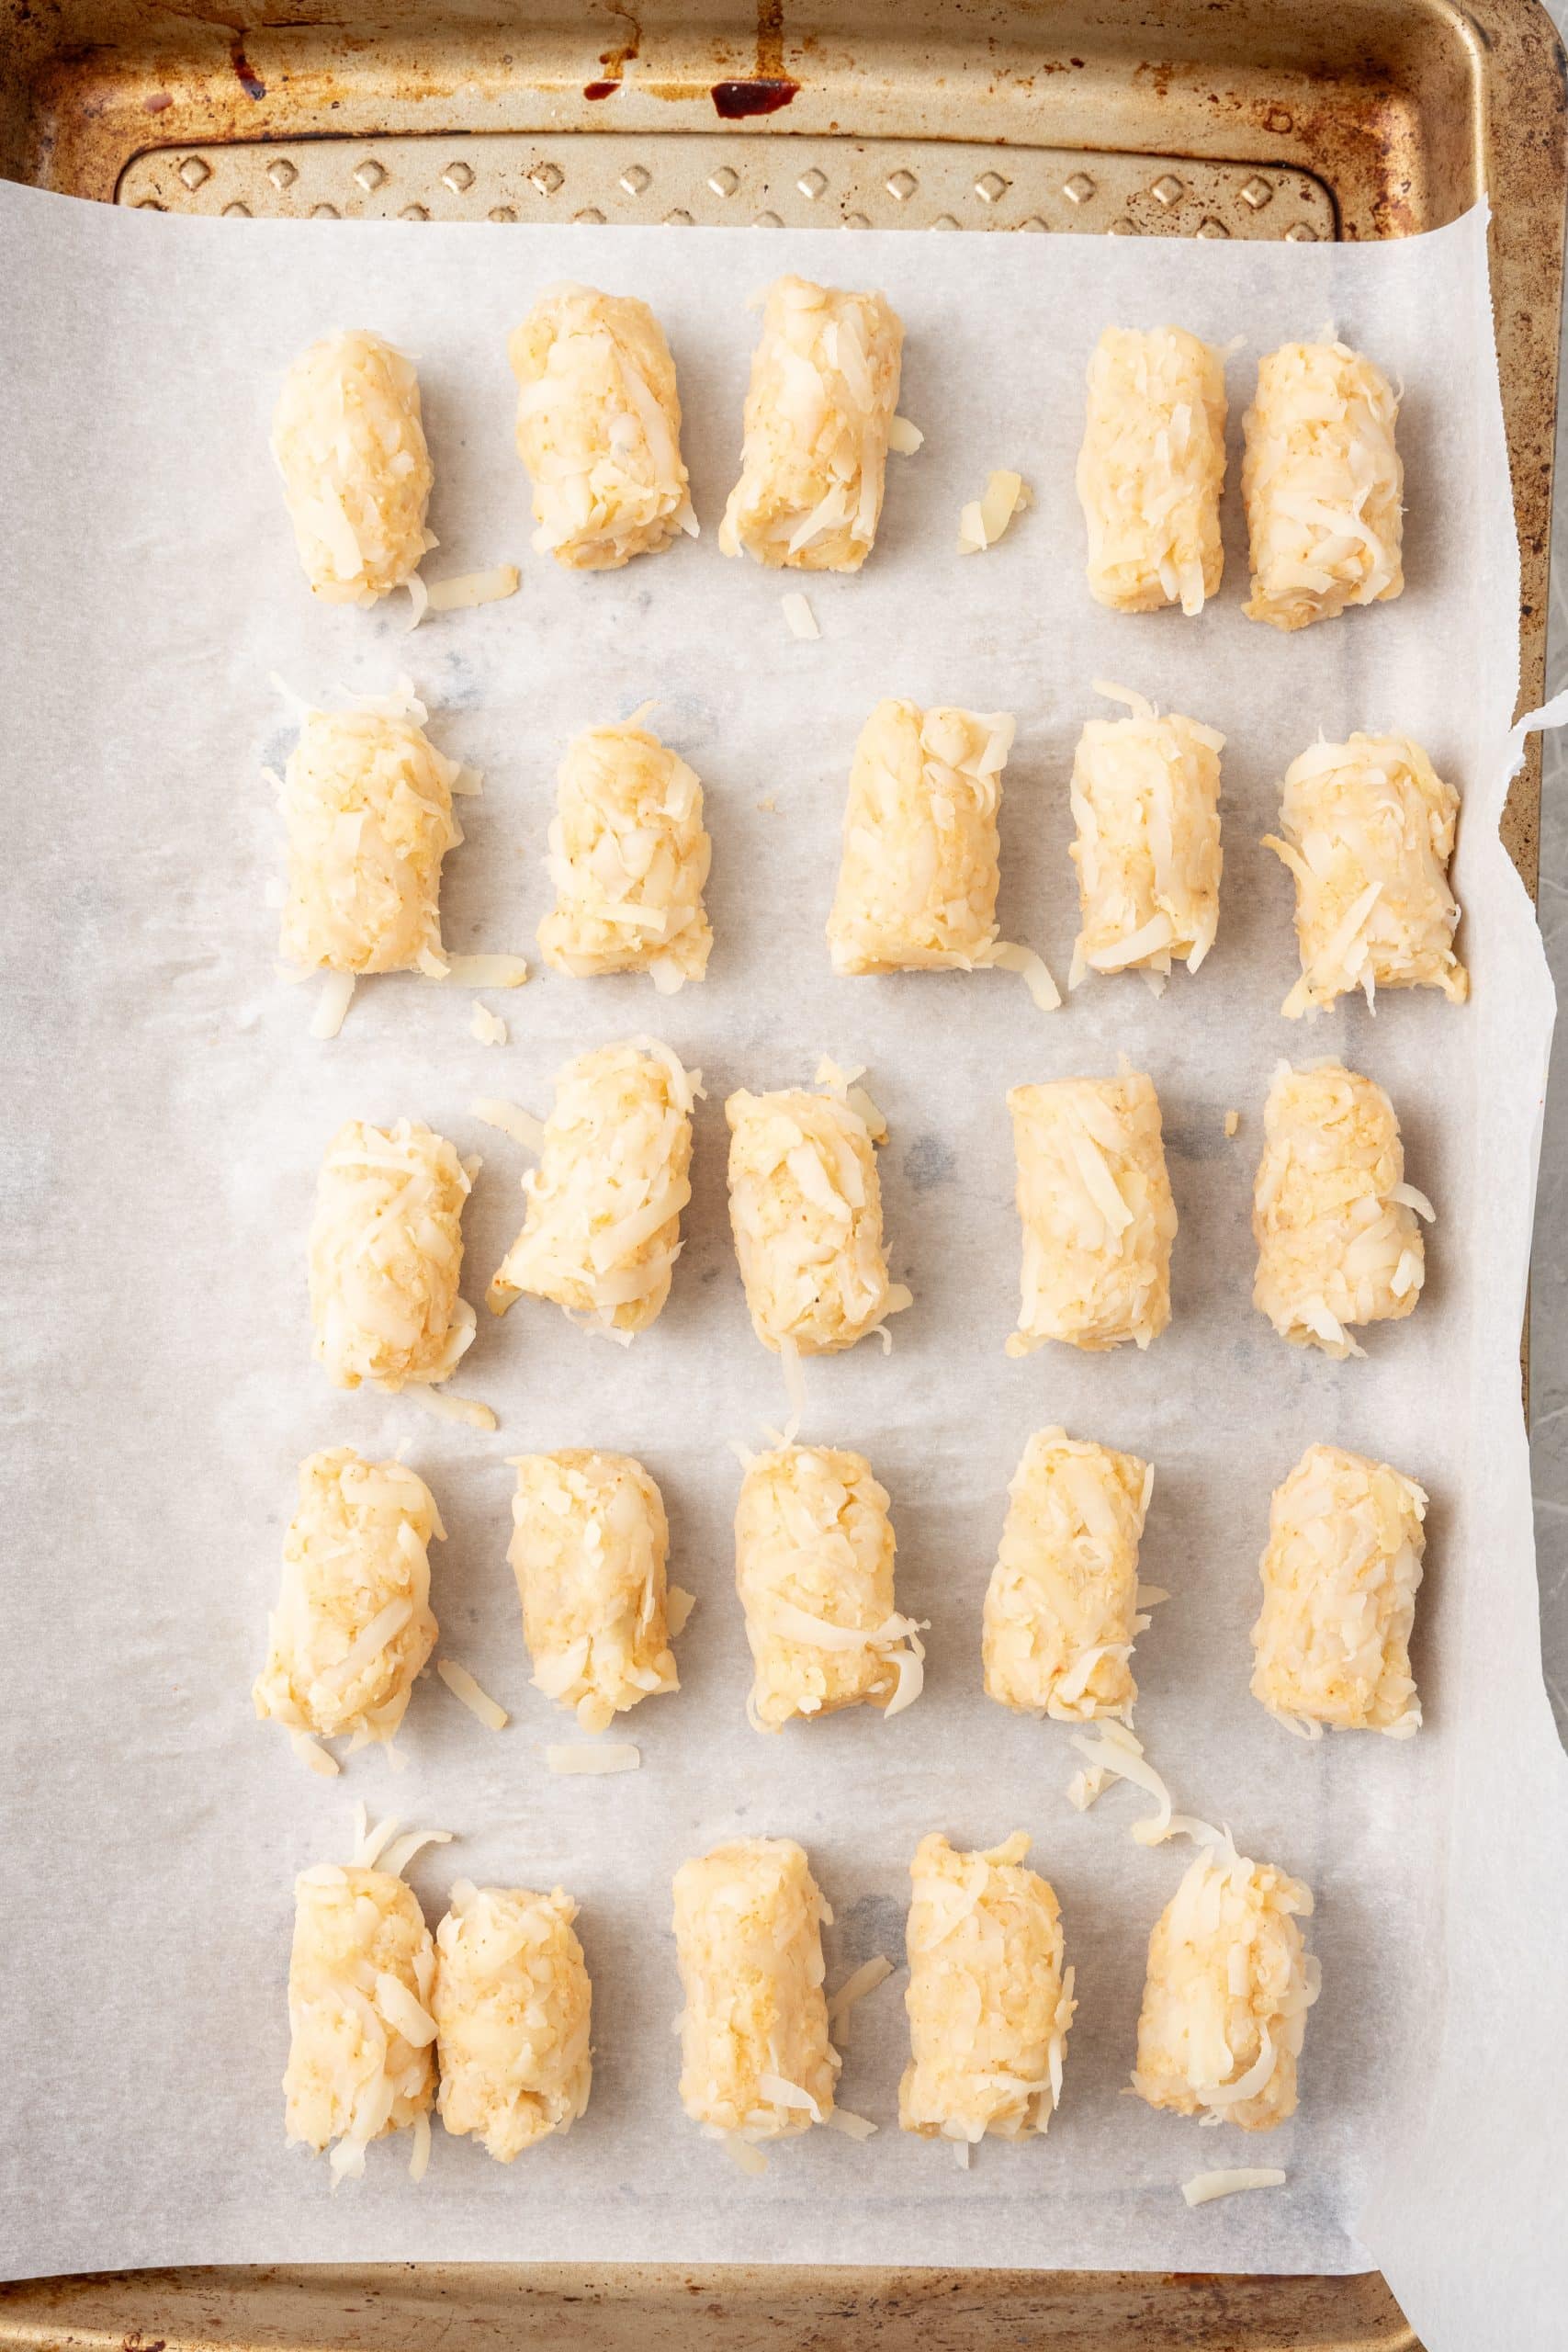 shredded potatoes shaped into tater tots and lined up on a parchment paper lined baking sheet